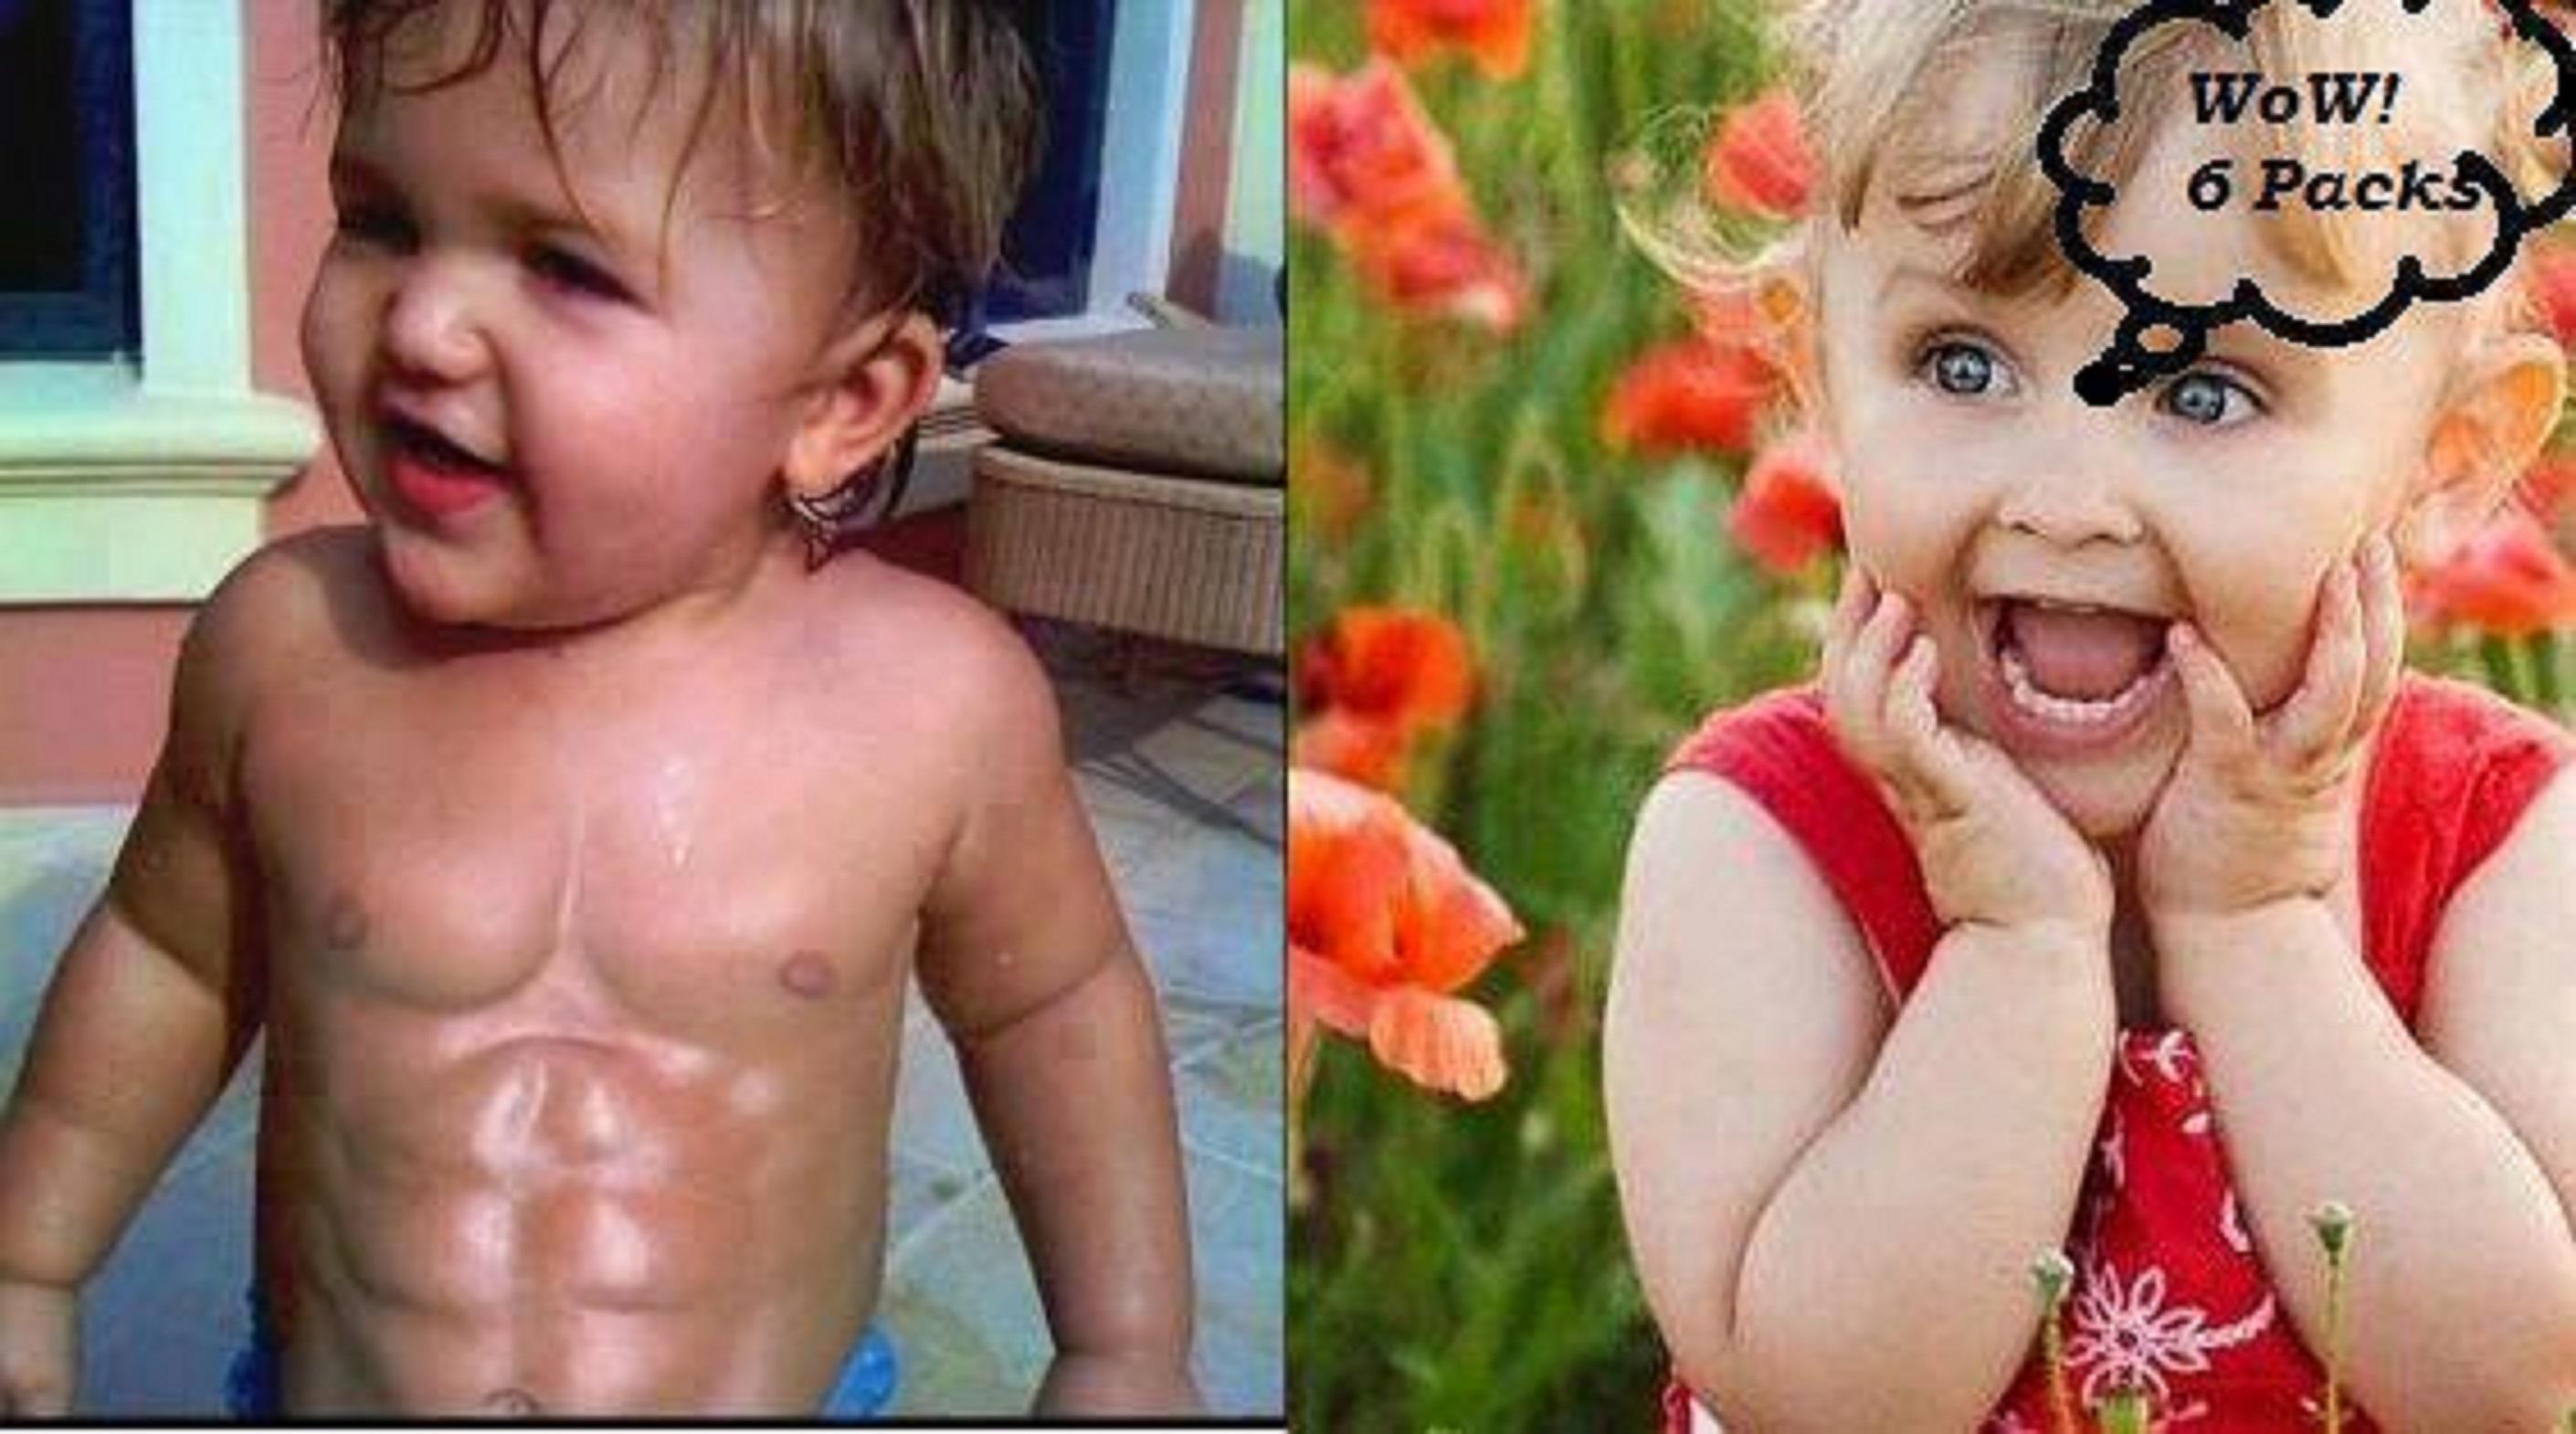 Funny Cute Baby Have 6 Packs And It Impress The Girls - 6 Packs Funny -  2820x1570 Wallpaper 